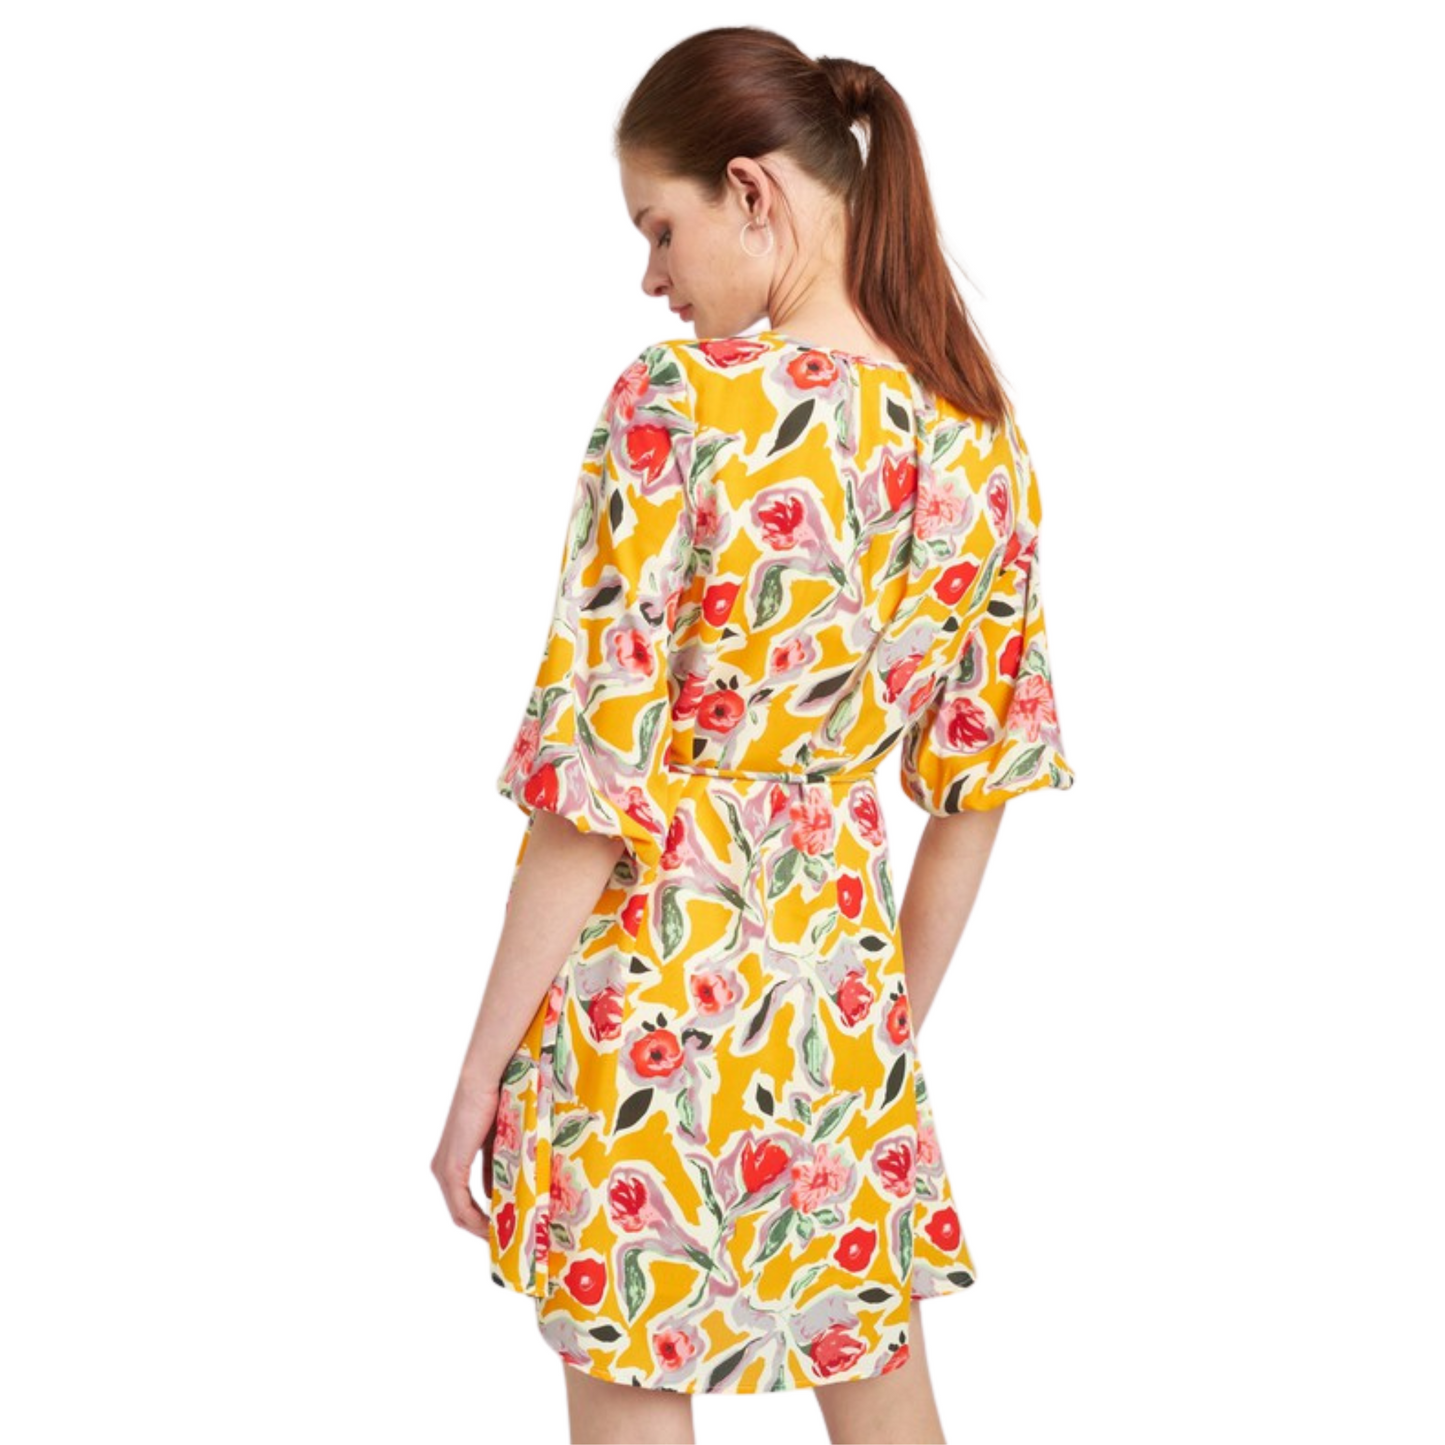 This yellow floral V-Neck Babydoll Dress is an entertaining option perfect for any summer event. Its mini dress length and v-neck style make this dress a timeless classic, and the floral pattern adds a touch of fun.